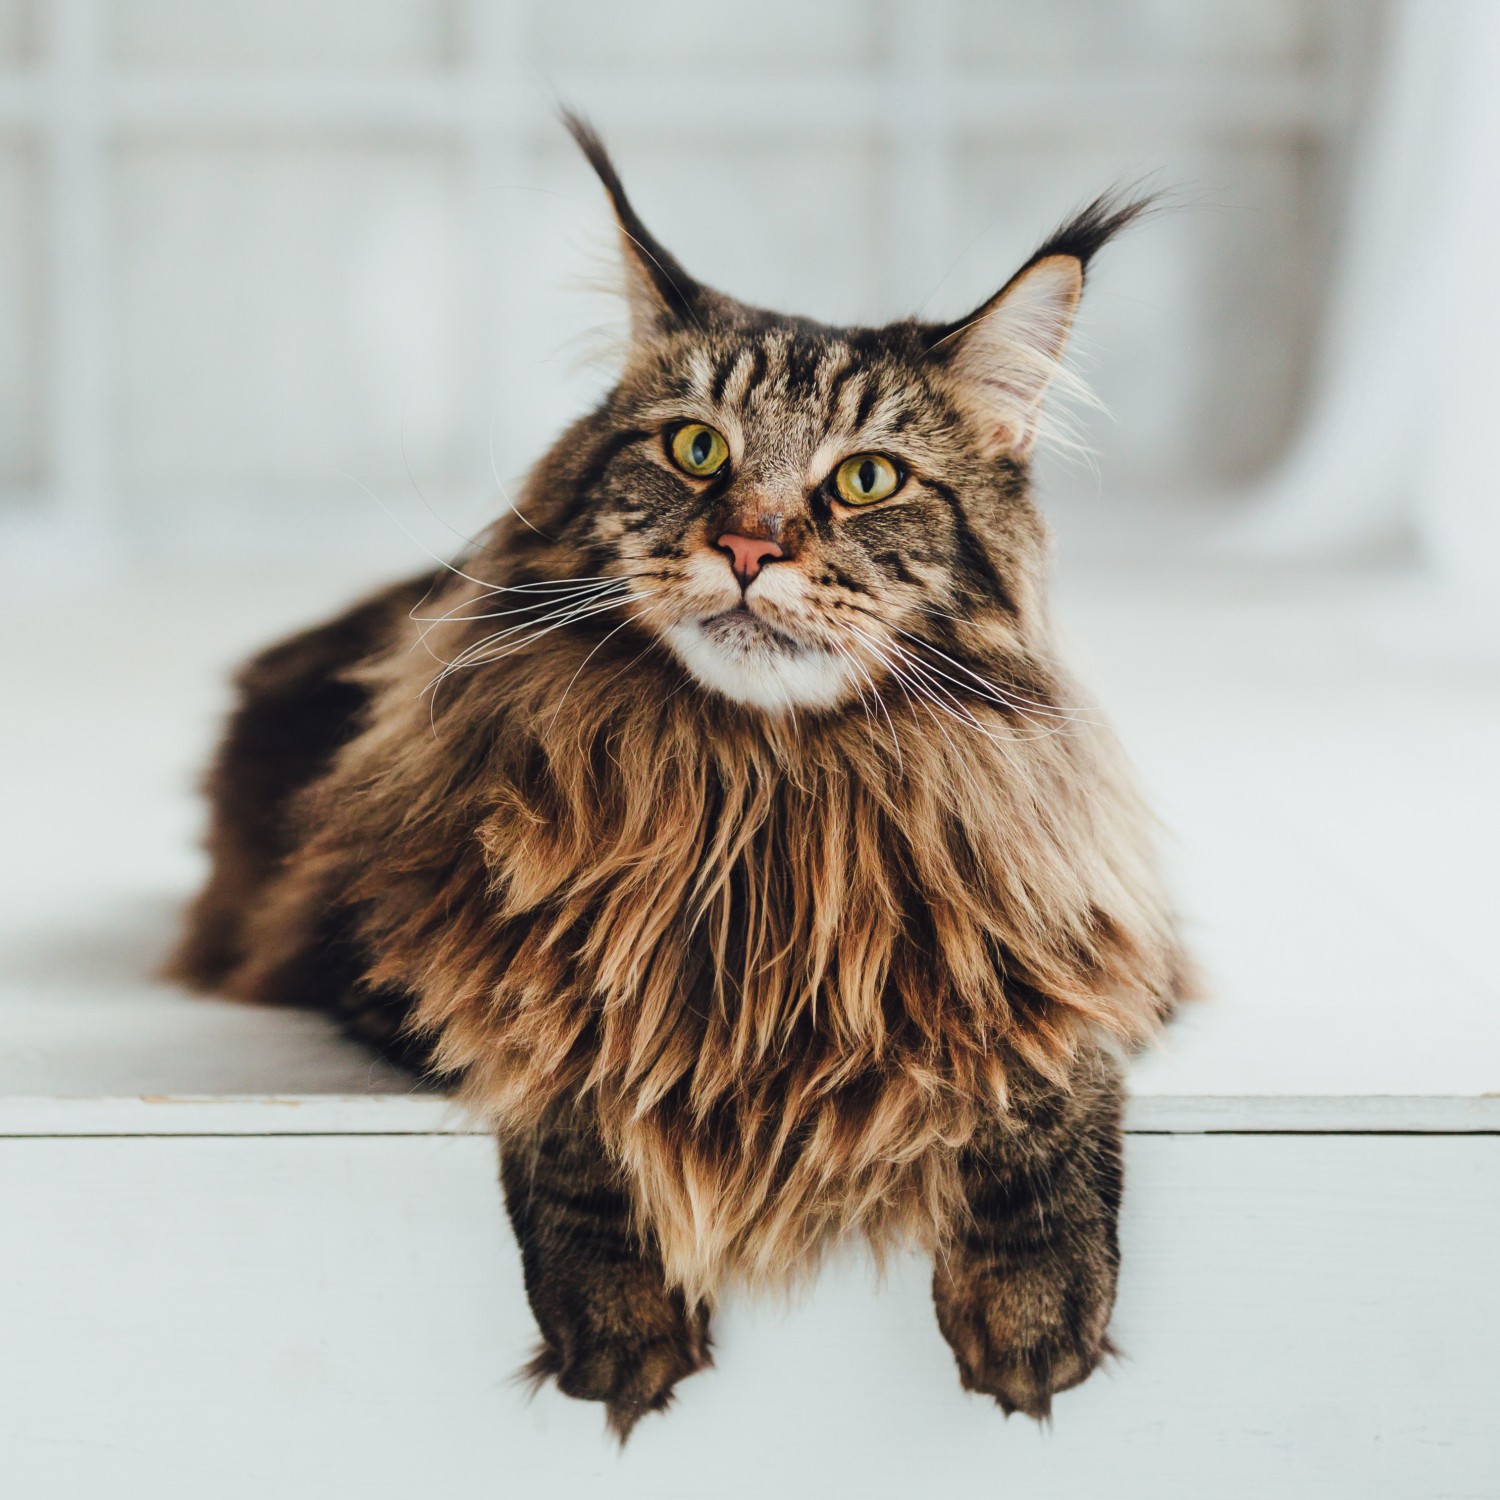 Main Coon Cat on a table